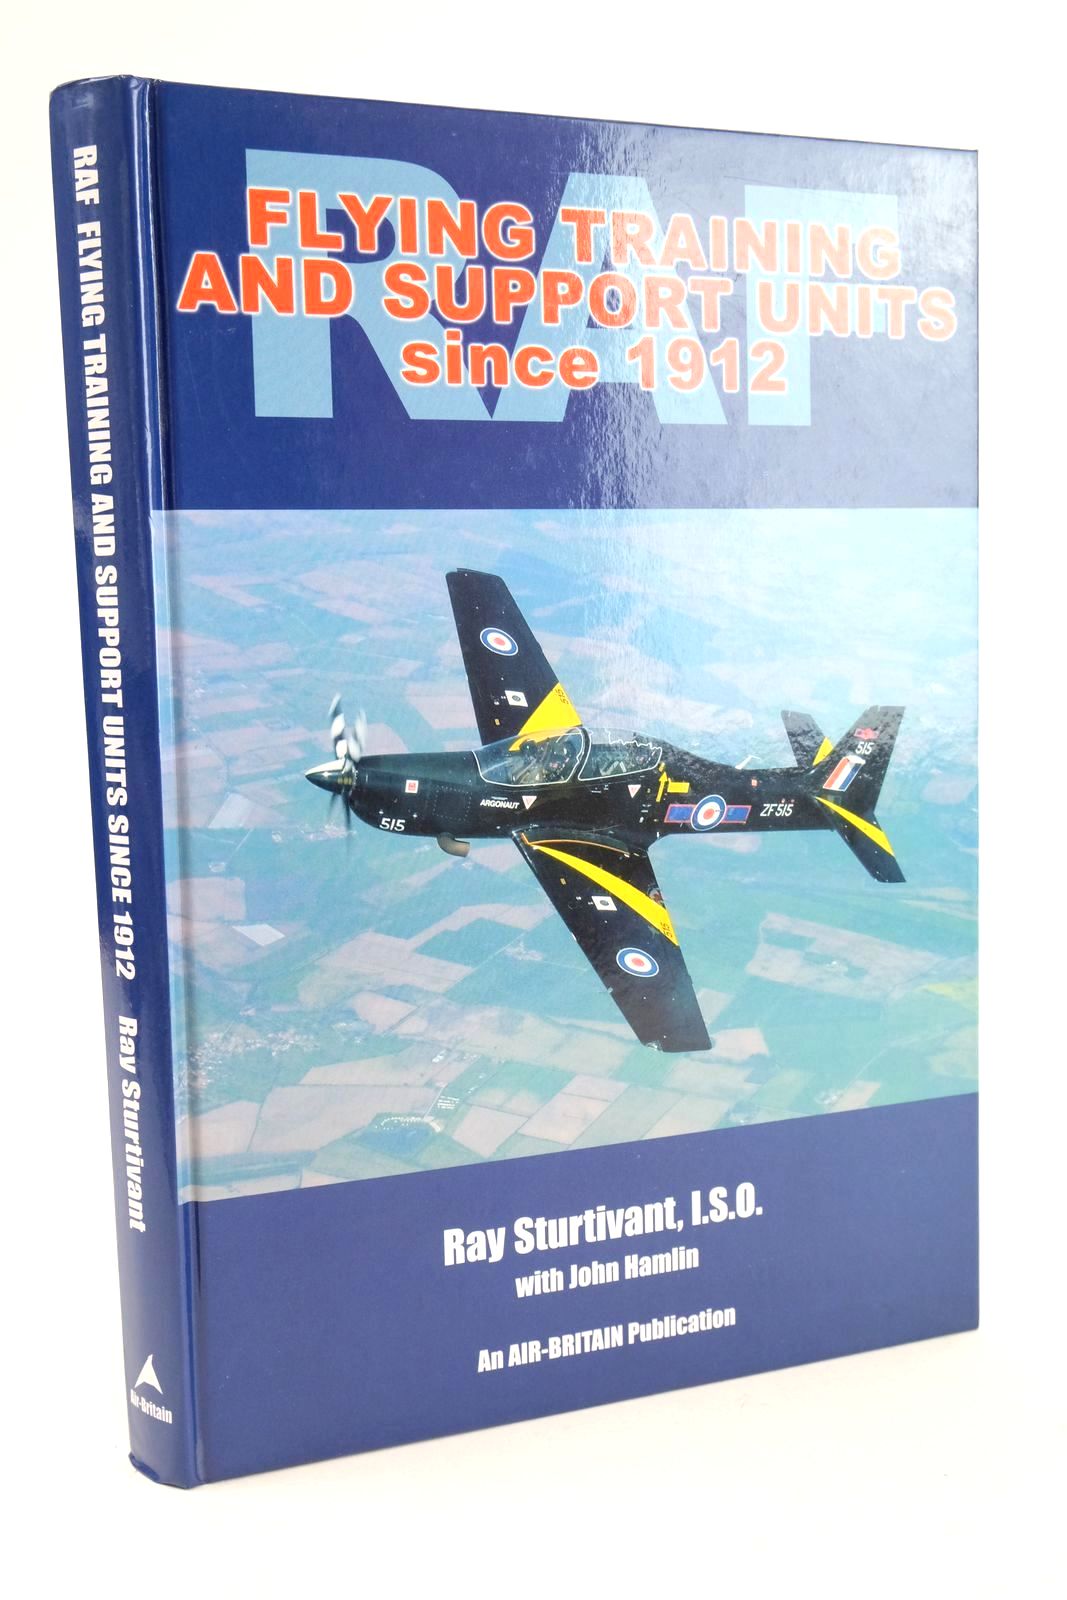 Photo of ROYAL AIR FORCE FLYING TRAINING AND SUPPORT UNITS SINCE 1912 written by Sturtivant, Ray Hamlin, John published by Air-Britain (Historians) Ltd. (STOCK CODE: 1325304)  for sale by Stella & Rose's Books